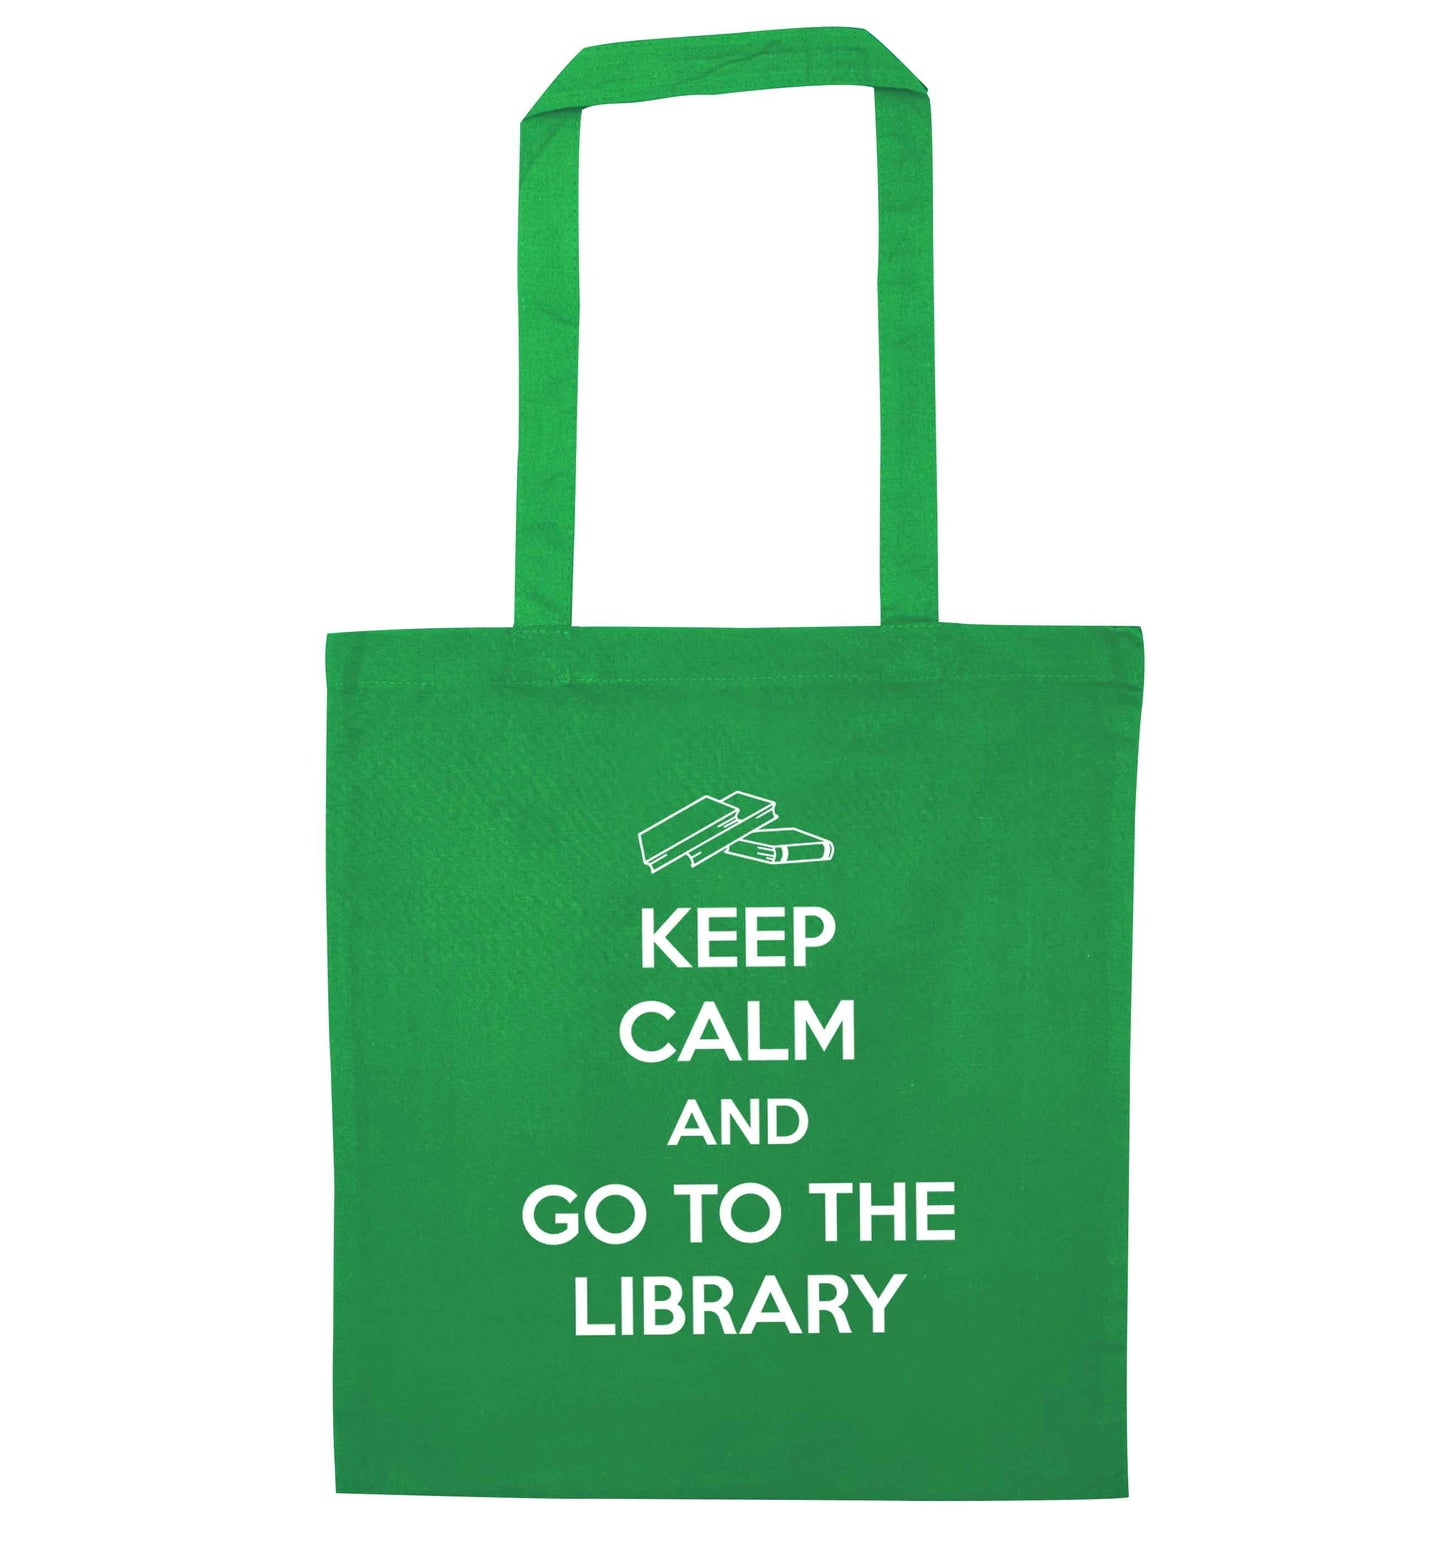 Keep calm and go to the library green tote bag